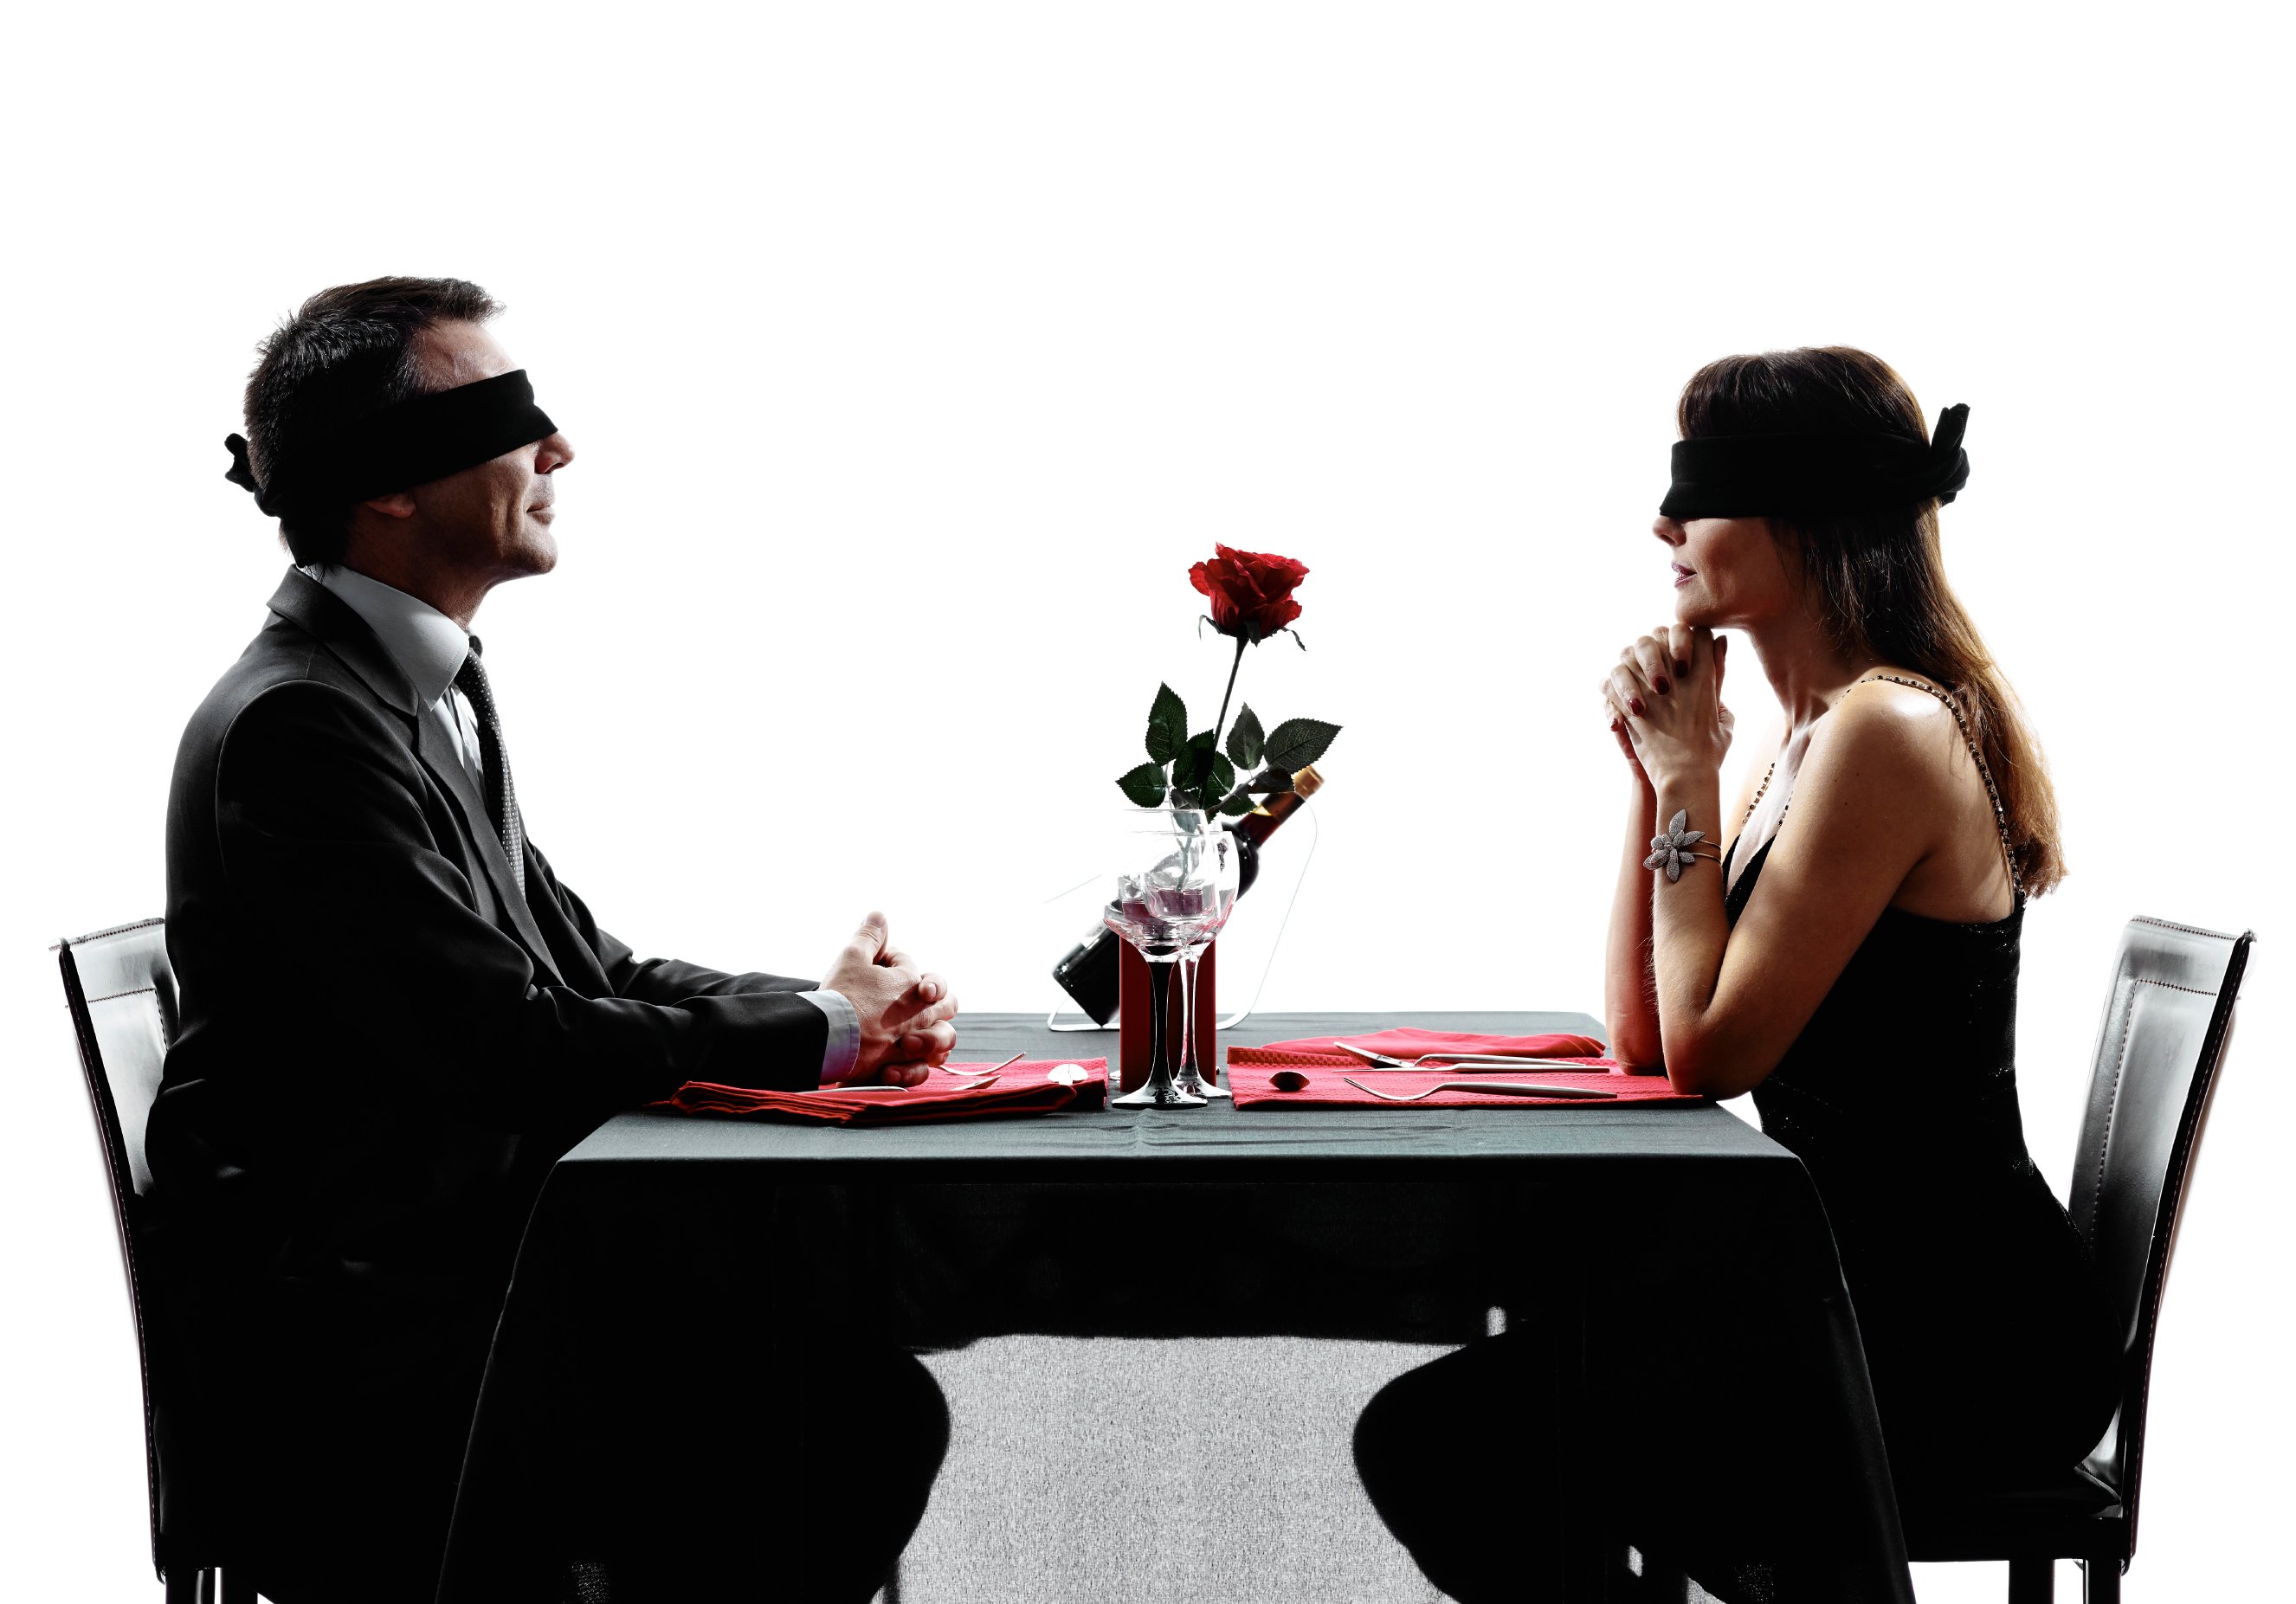 Untitled - City Speed Dating